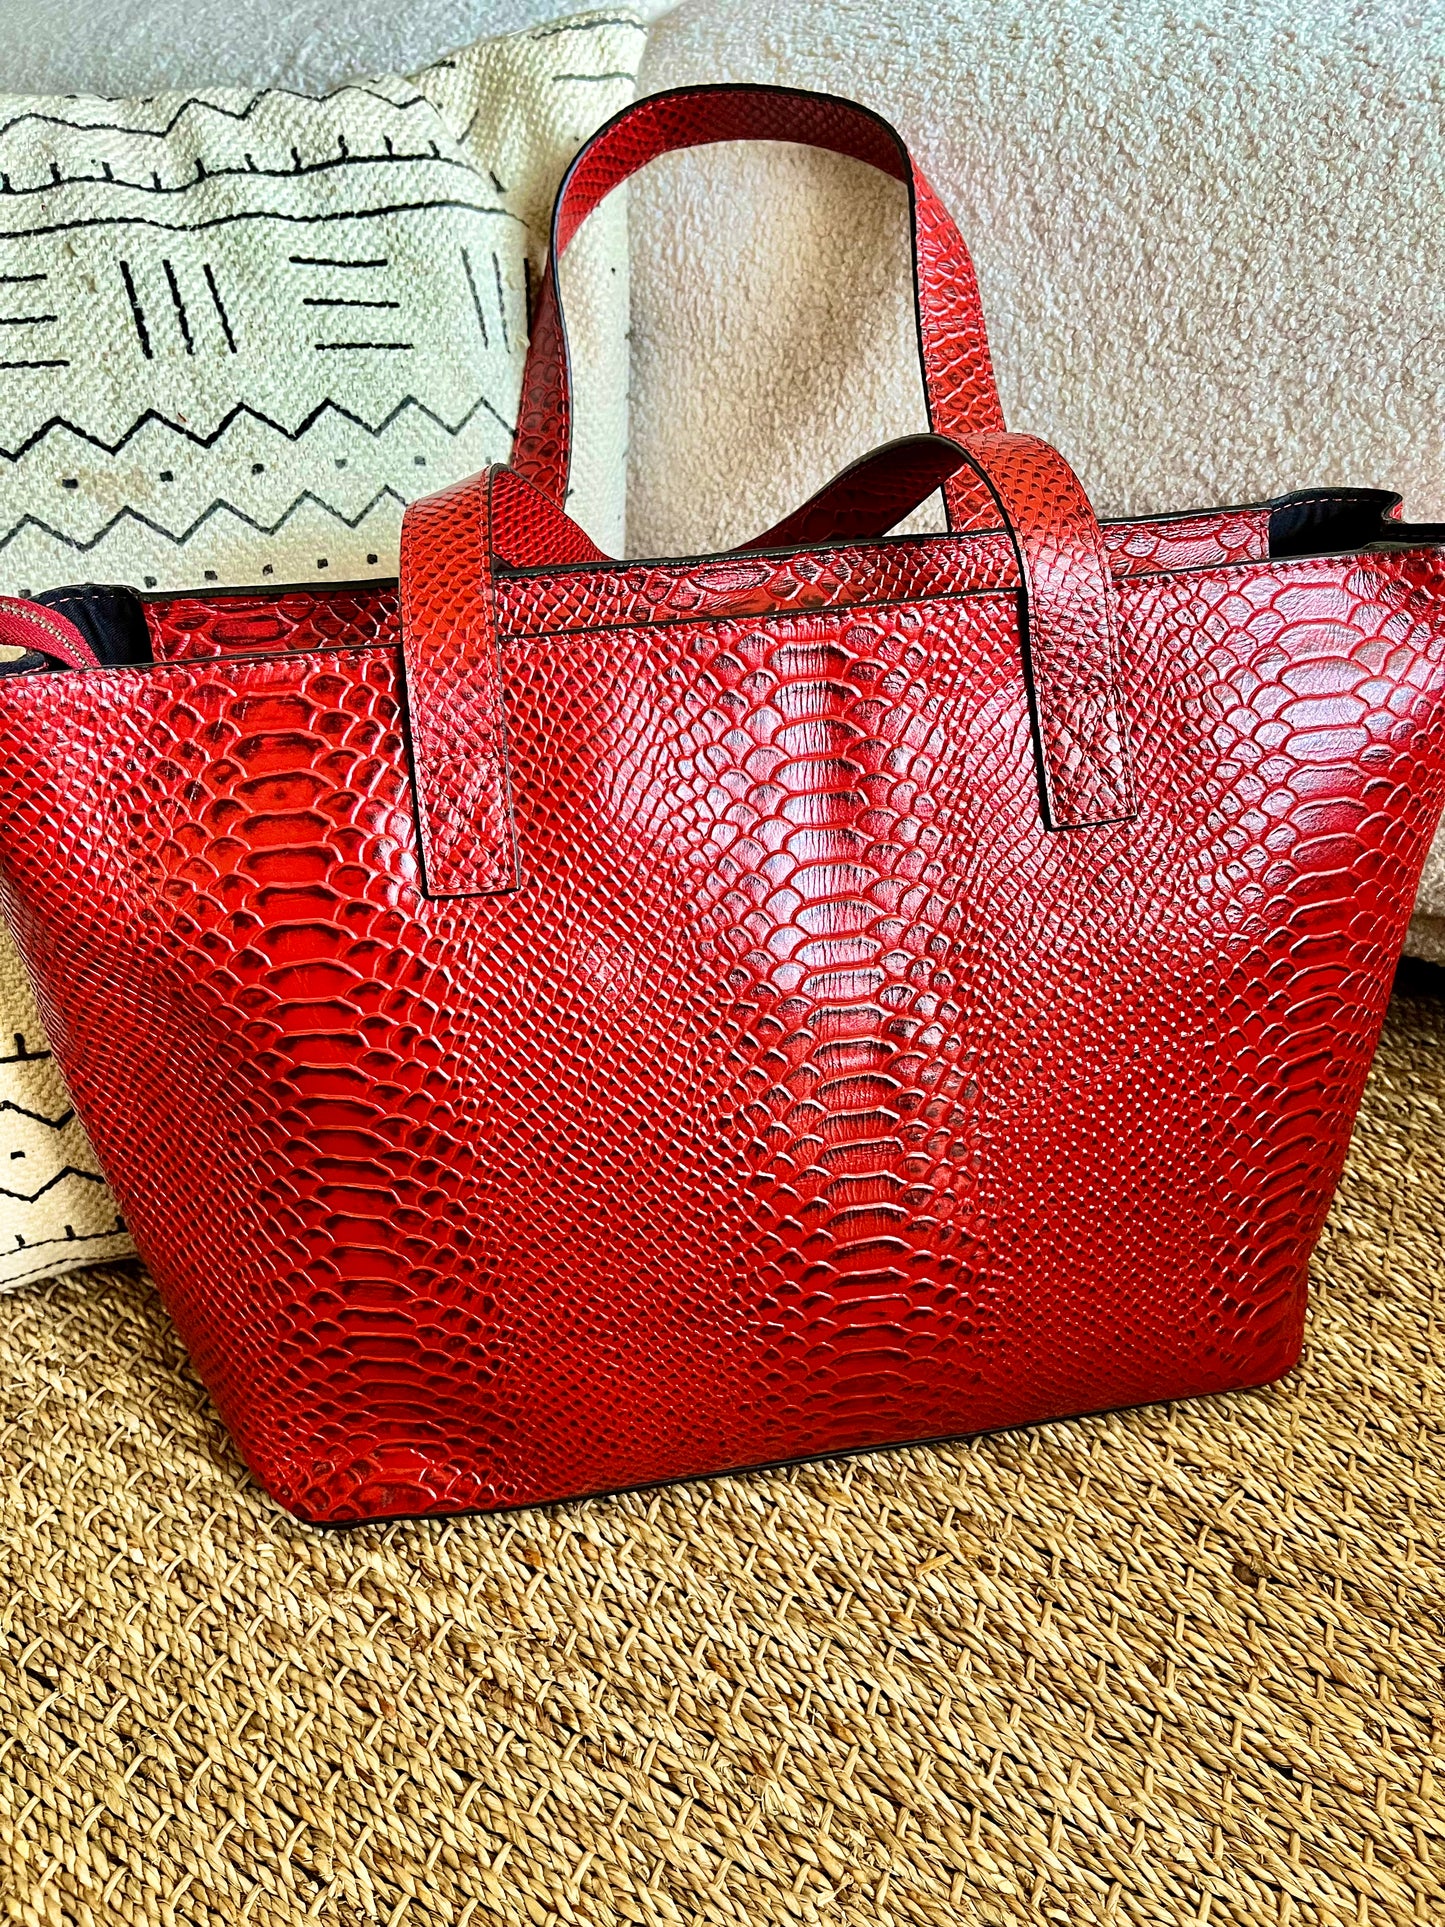 Izadora Red Leather Tote